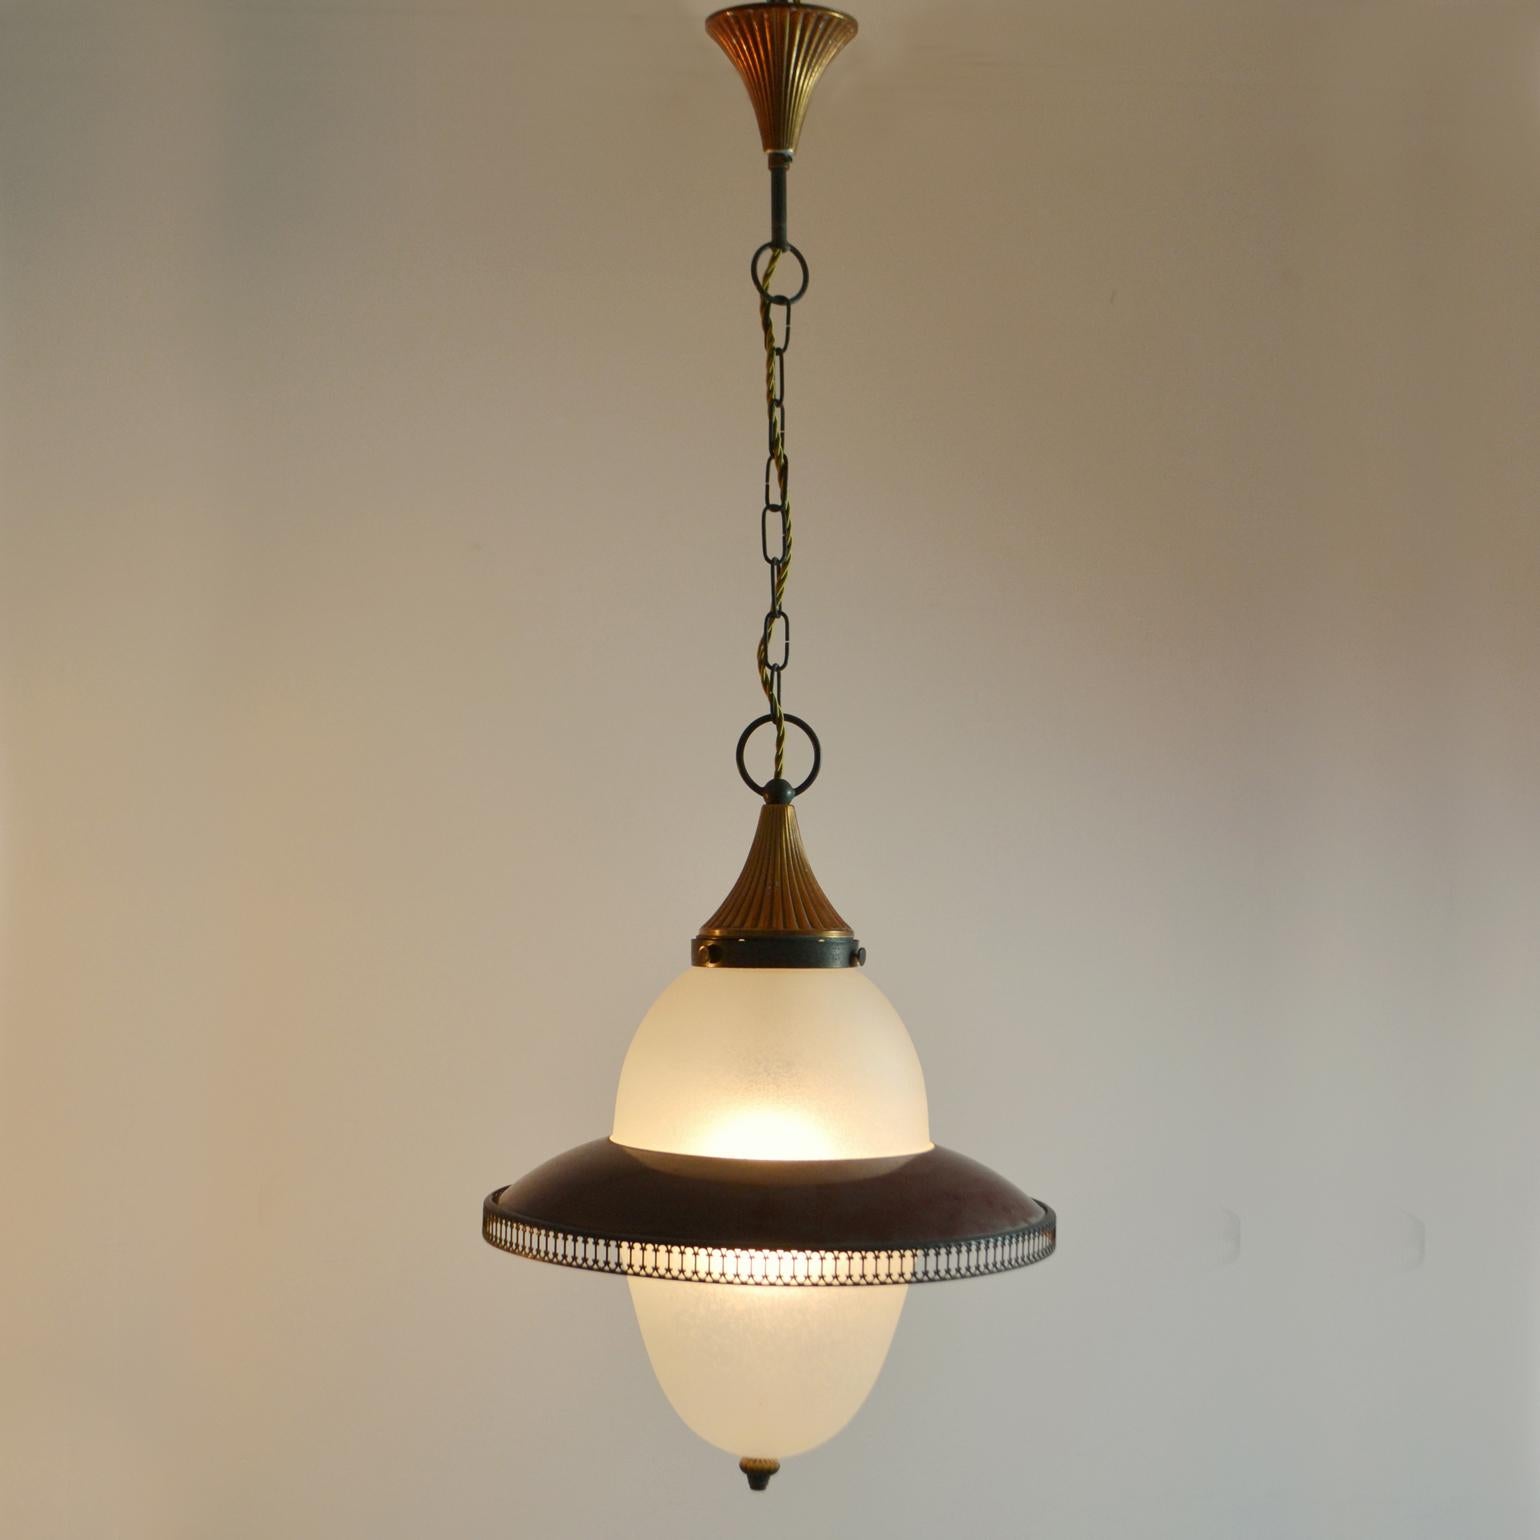 Frosted glass lantern with dark red metal shade like a Saturn ring and fine laced metal border is hanging from a chain and anodized copper ceiling rose, Italy 1950's. This pendant in warm tones of soft white, copper, Bordeaux red and brass is